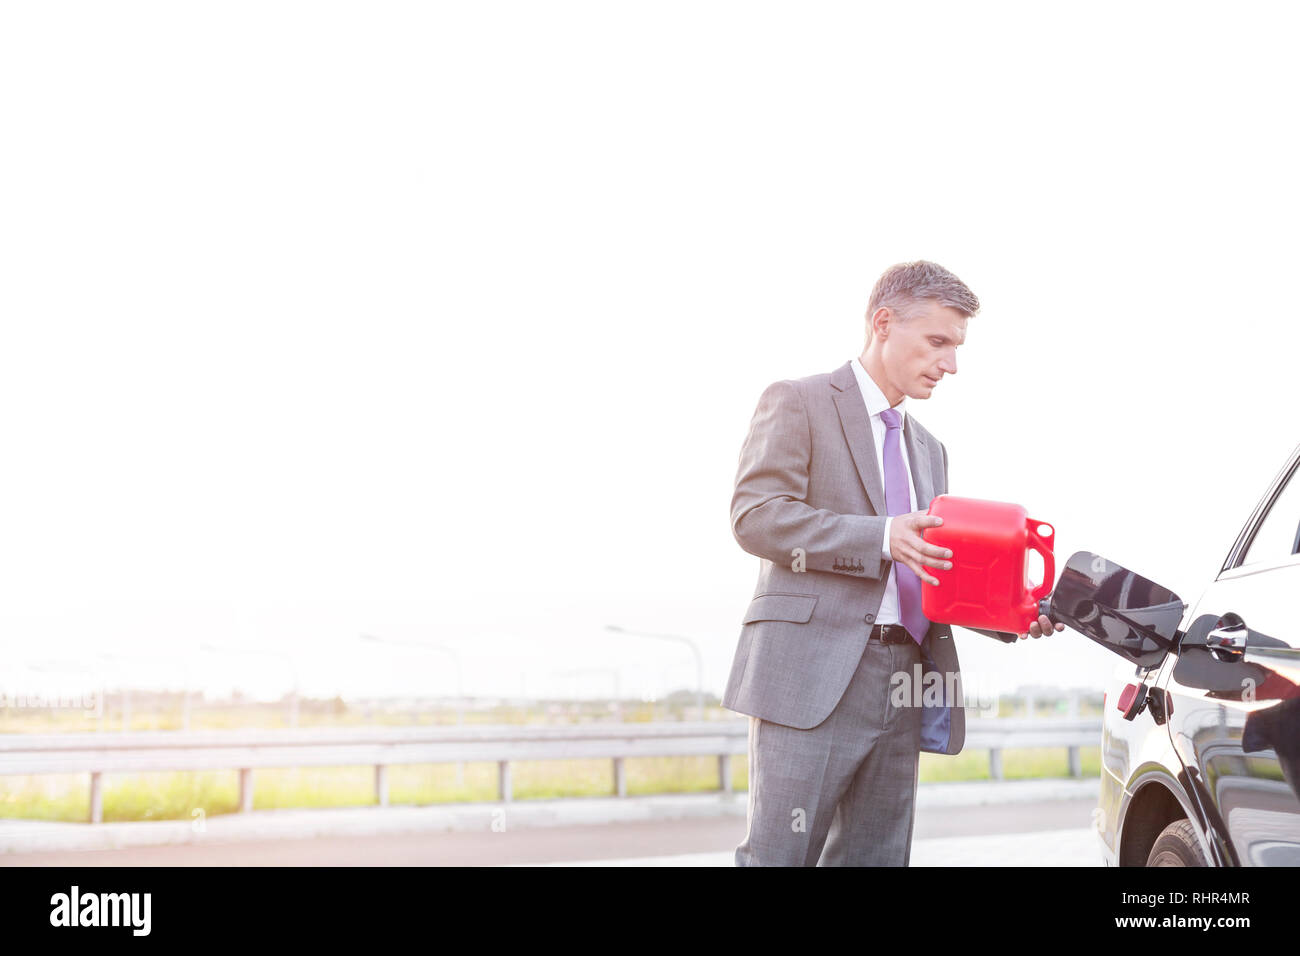 Mature executive fueling car with canister against sky Stock Photo